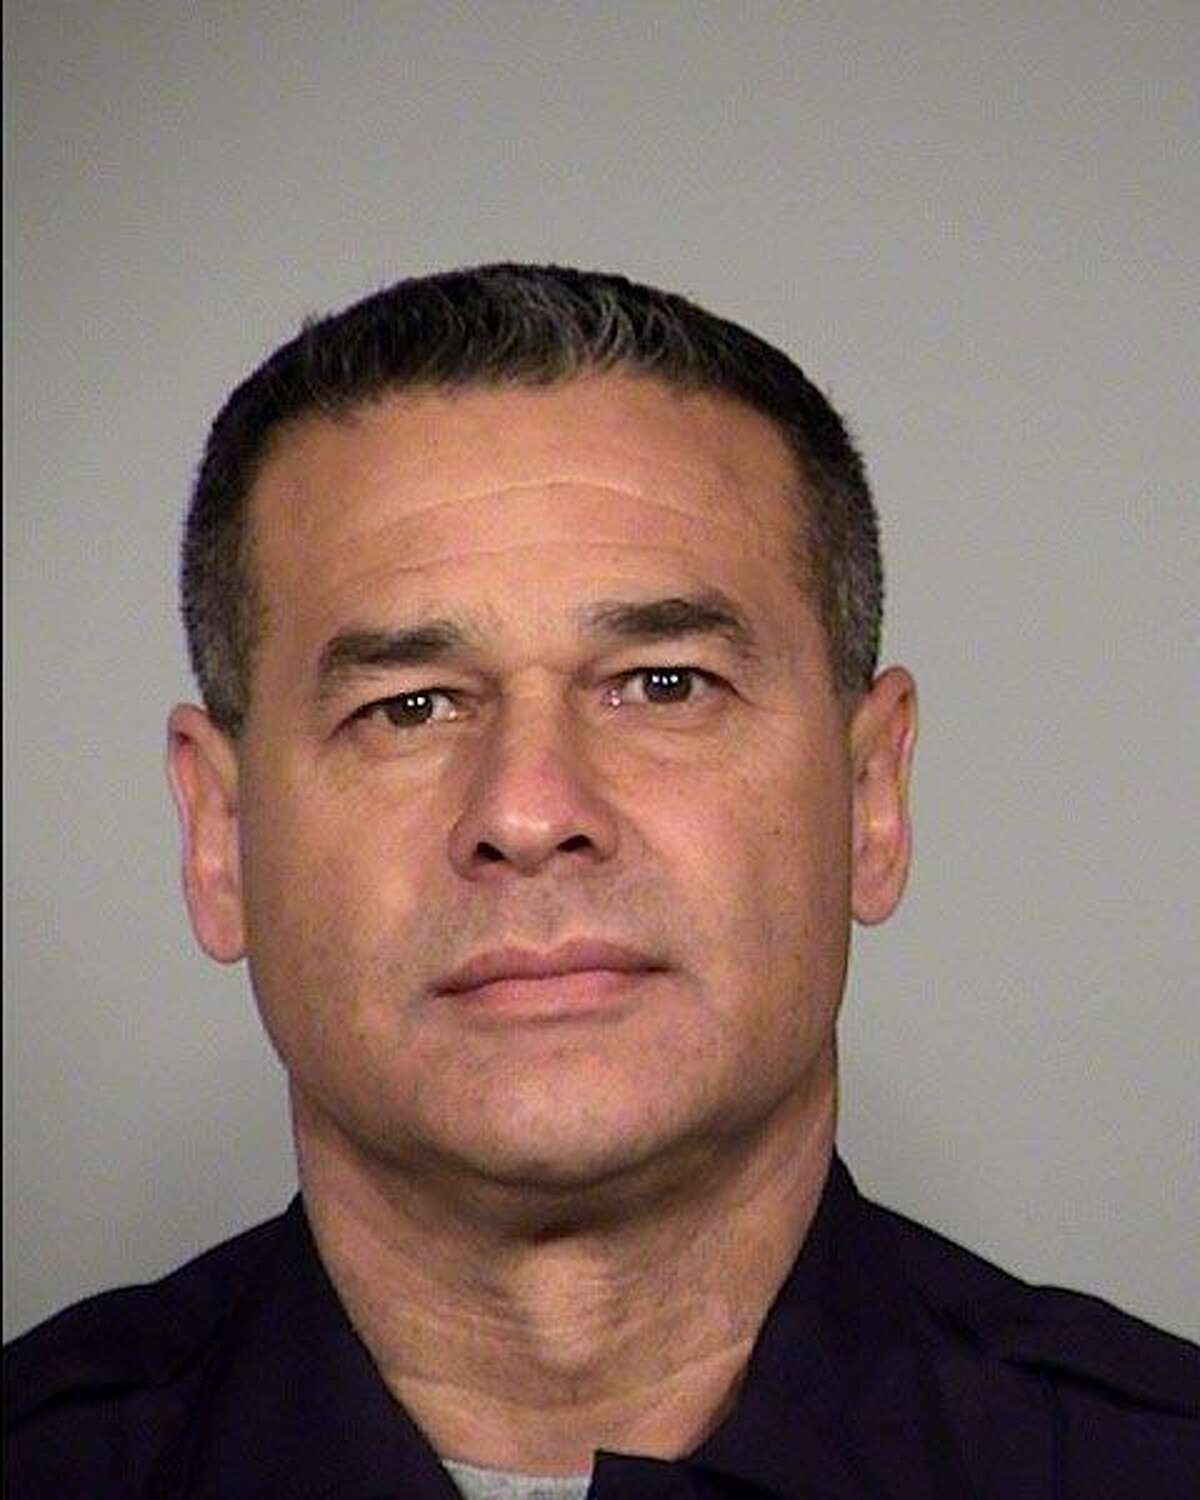 Benjamin Marconi, Nov. 20, 2016 Detective Marconi was shot and killed while issuing a traffic citation just yards from police headquarters. He was 50-years-old and had been on the force for 20 years.